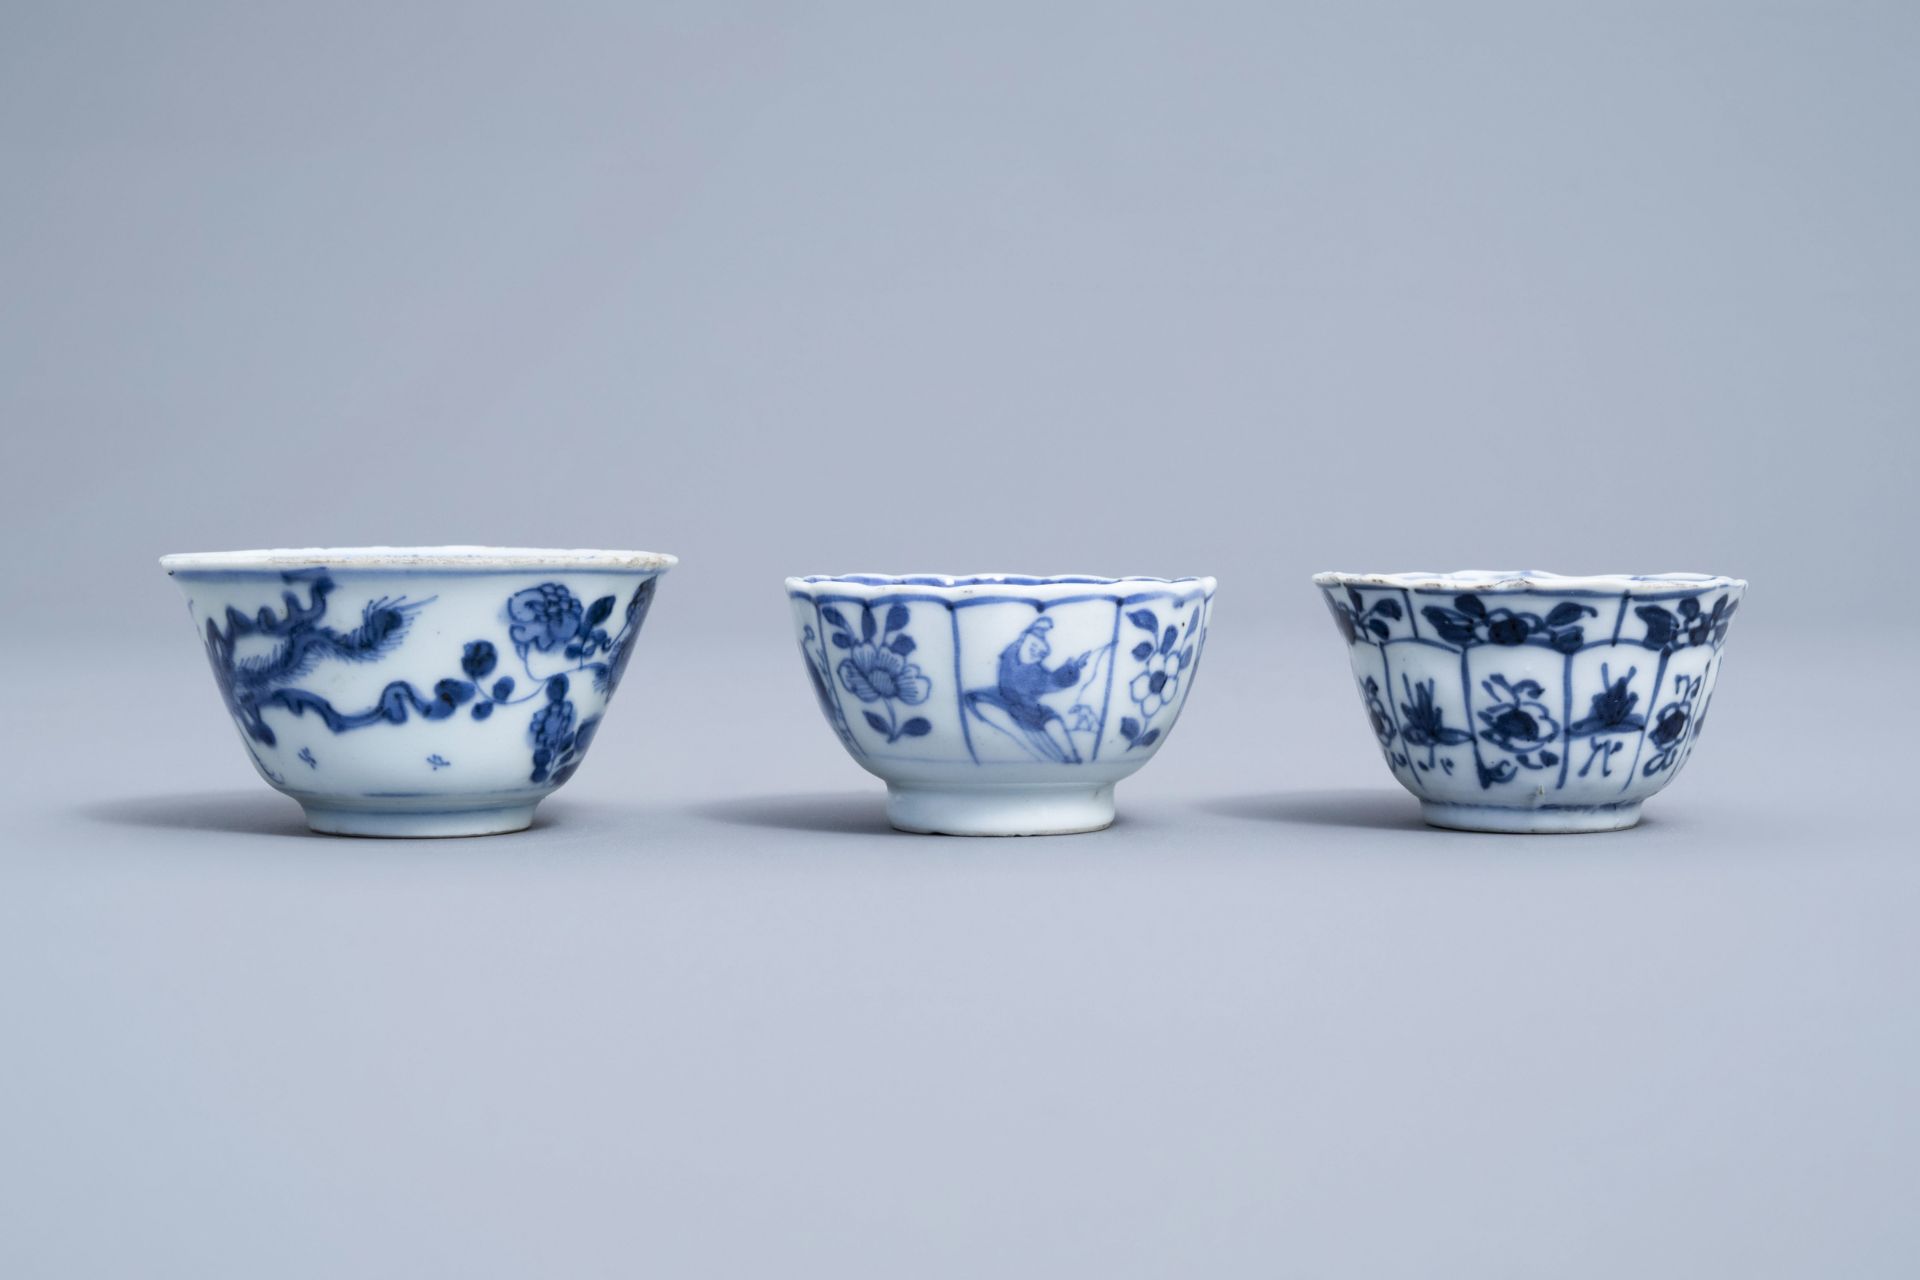 A varied collection of Chinese blue and white porcelain, 18th C. and later - Image 33 of 54